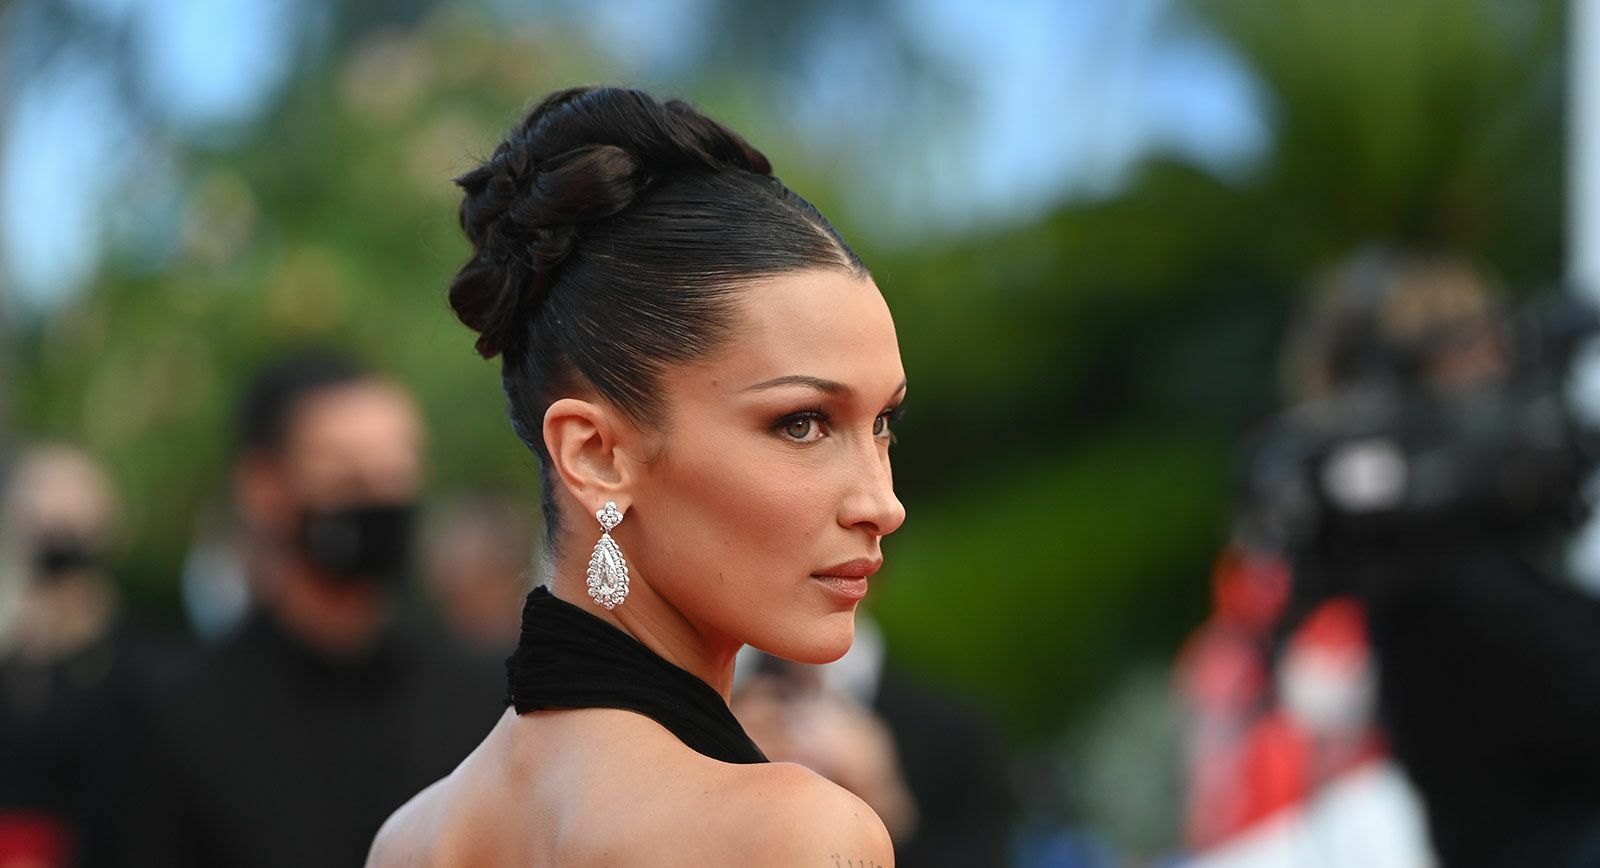 Bella Hadid in Chopard Red Caret Collection earrings at the Cannes Film Festival 2021